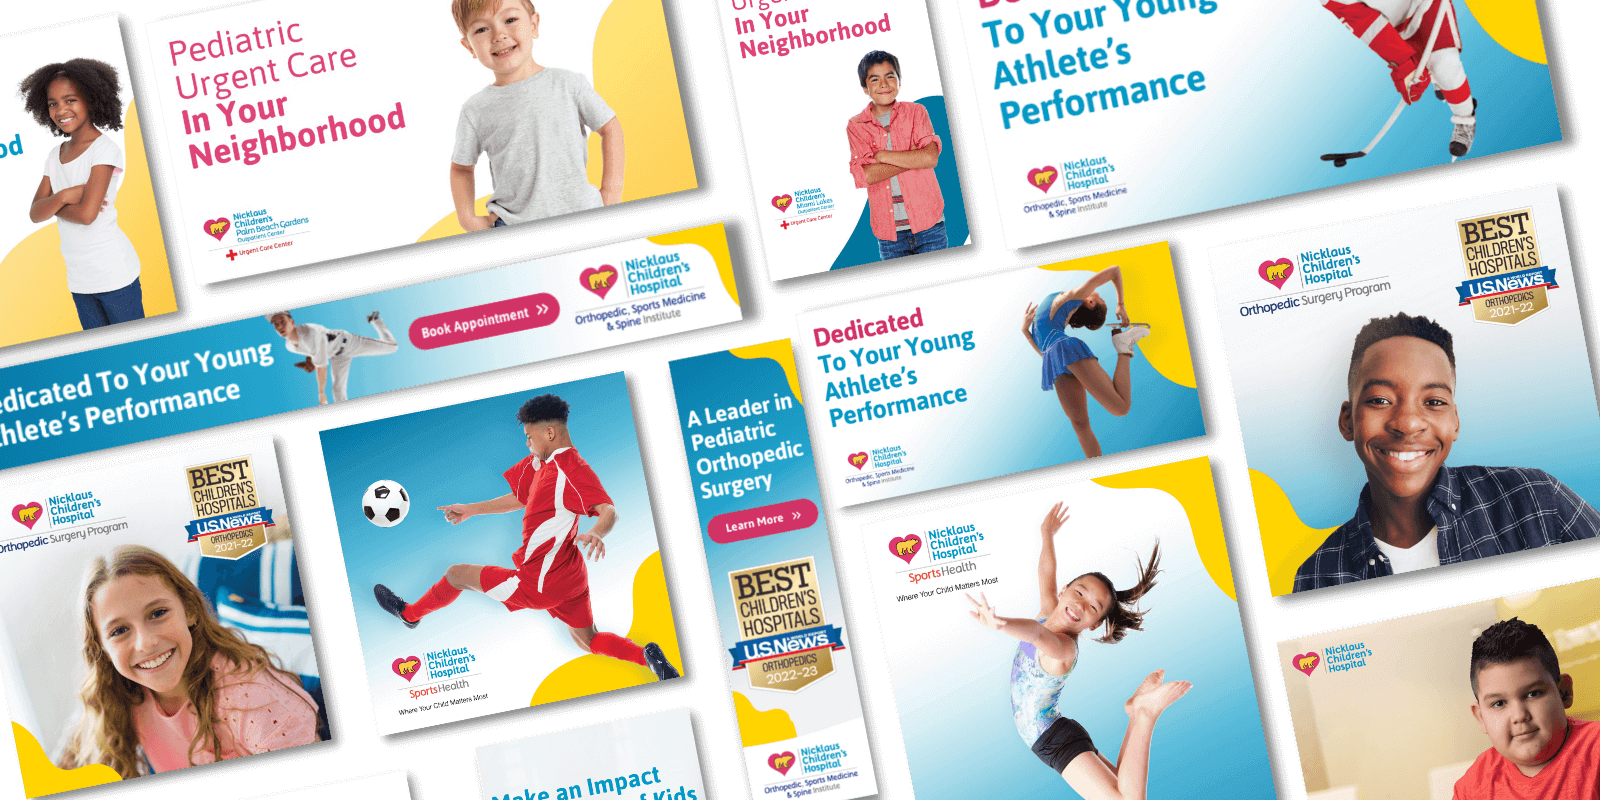 Nicklaus Children's Hospital elements of both the paid social and programmatic refreshed creative mix.